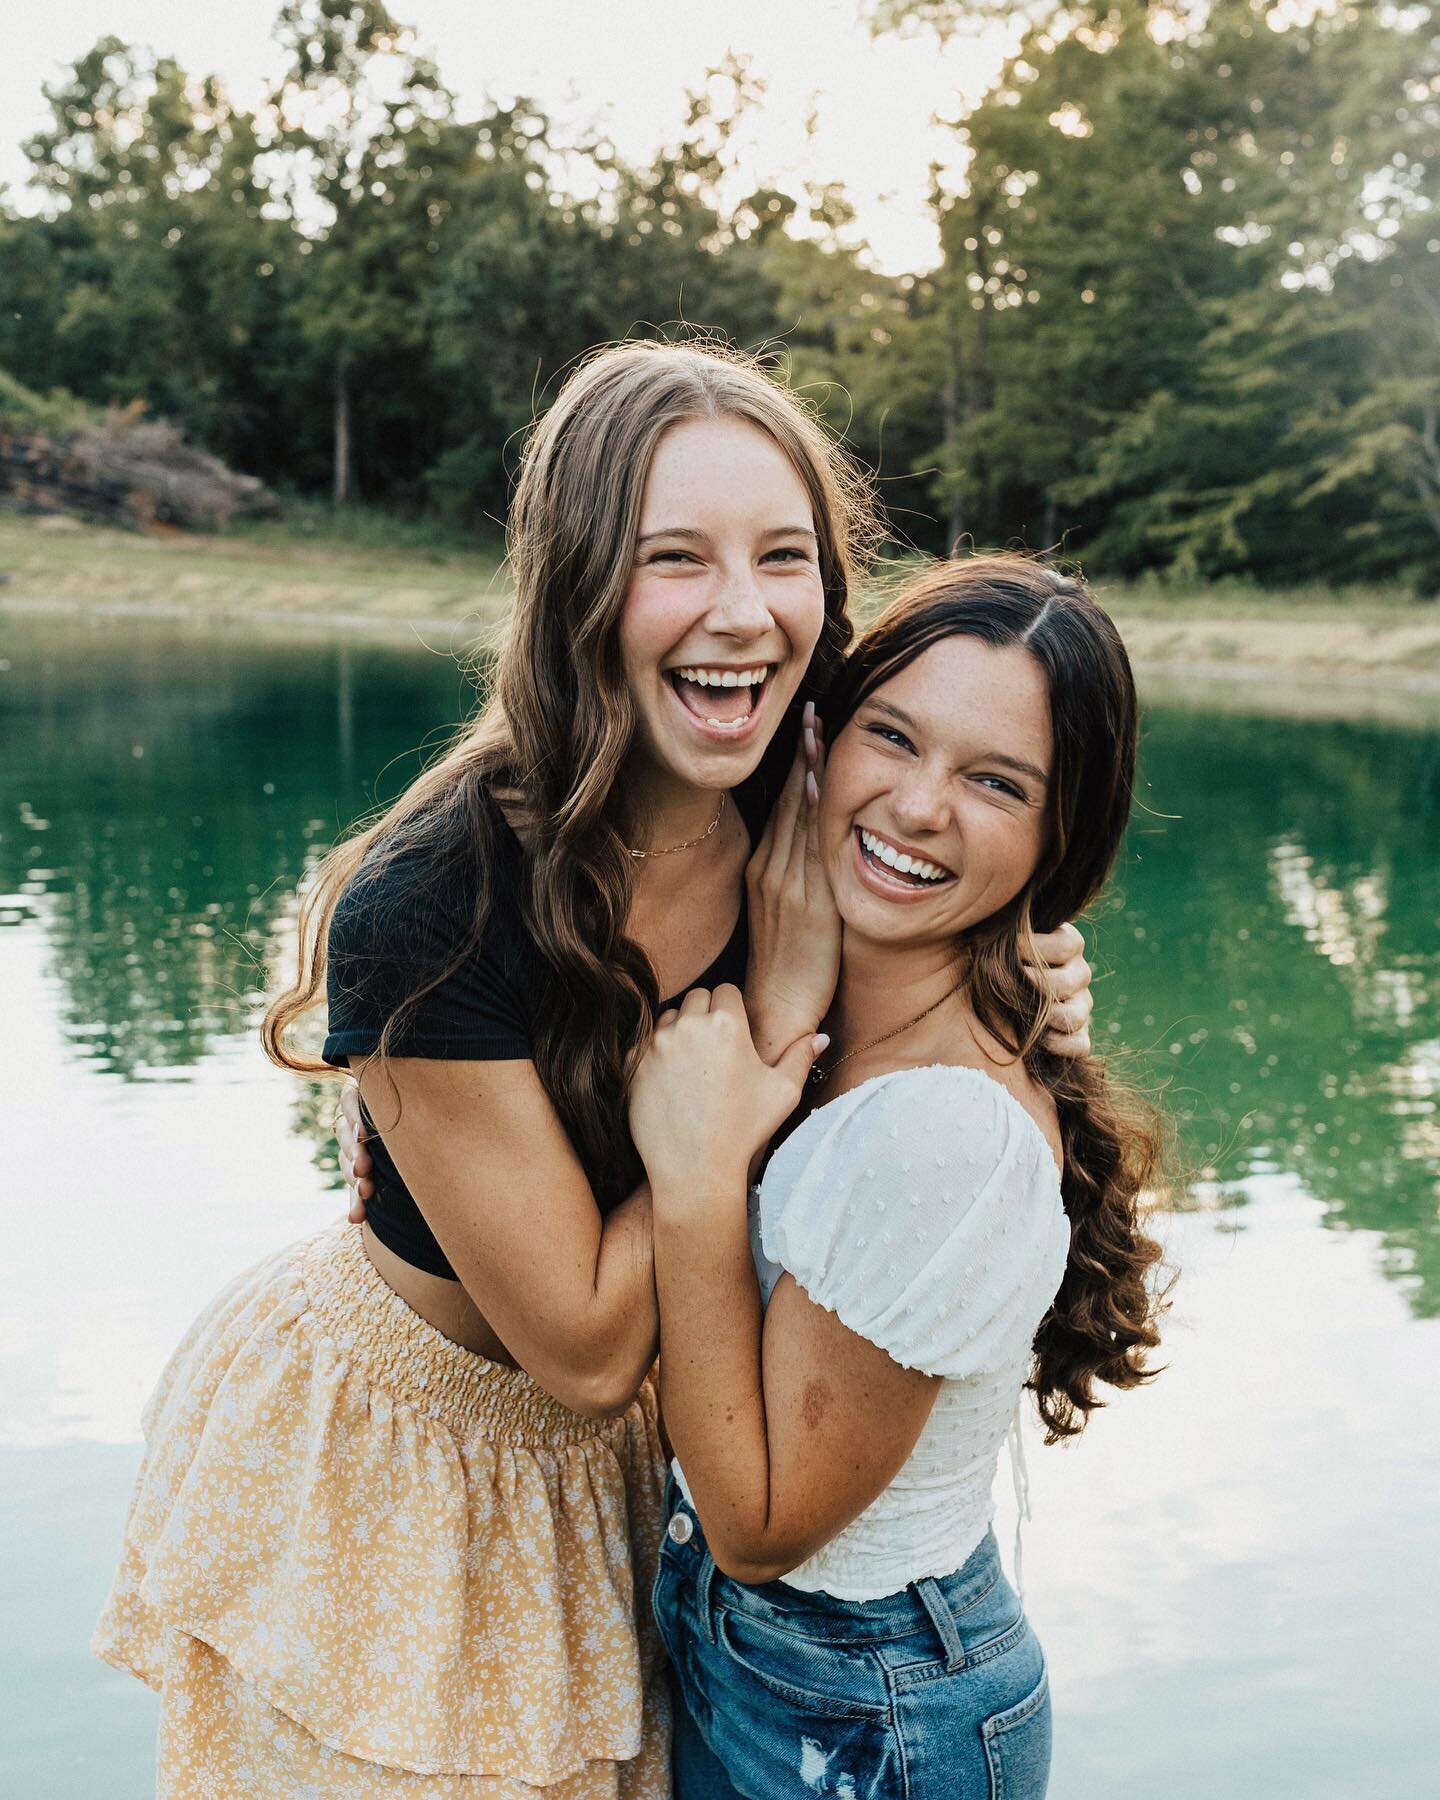 To all my seniors: you don&rsquo;t have to do your senior photoshoot by yourself. Message me for details about booking a fun senior shoot with your bestie/cousin like these girls did 💚 I also always love getting a few pics with you + your mom or dad